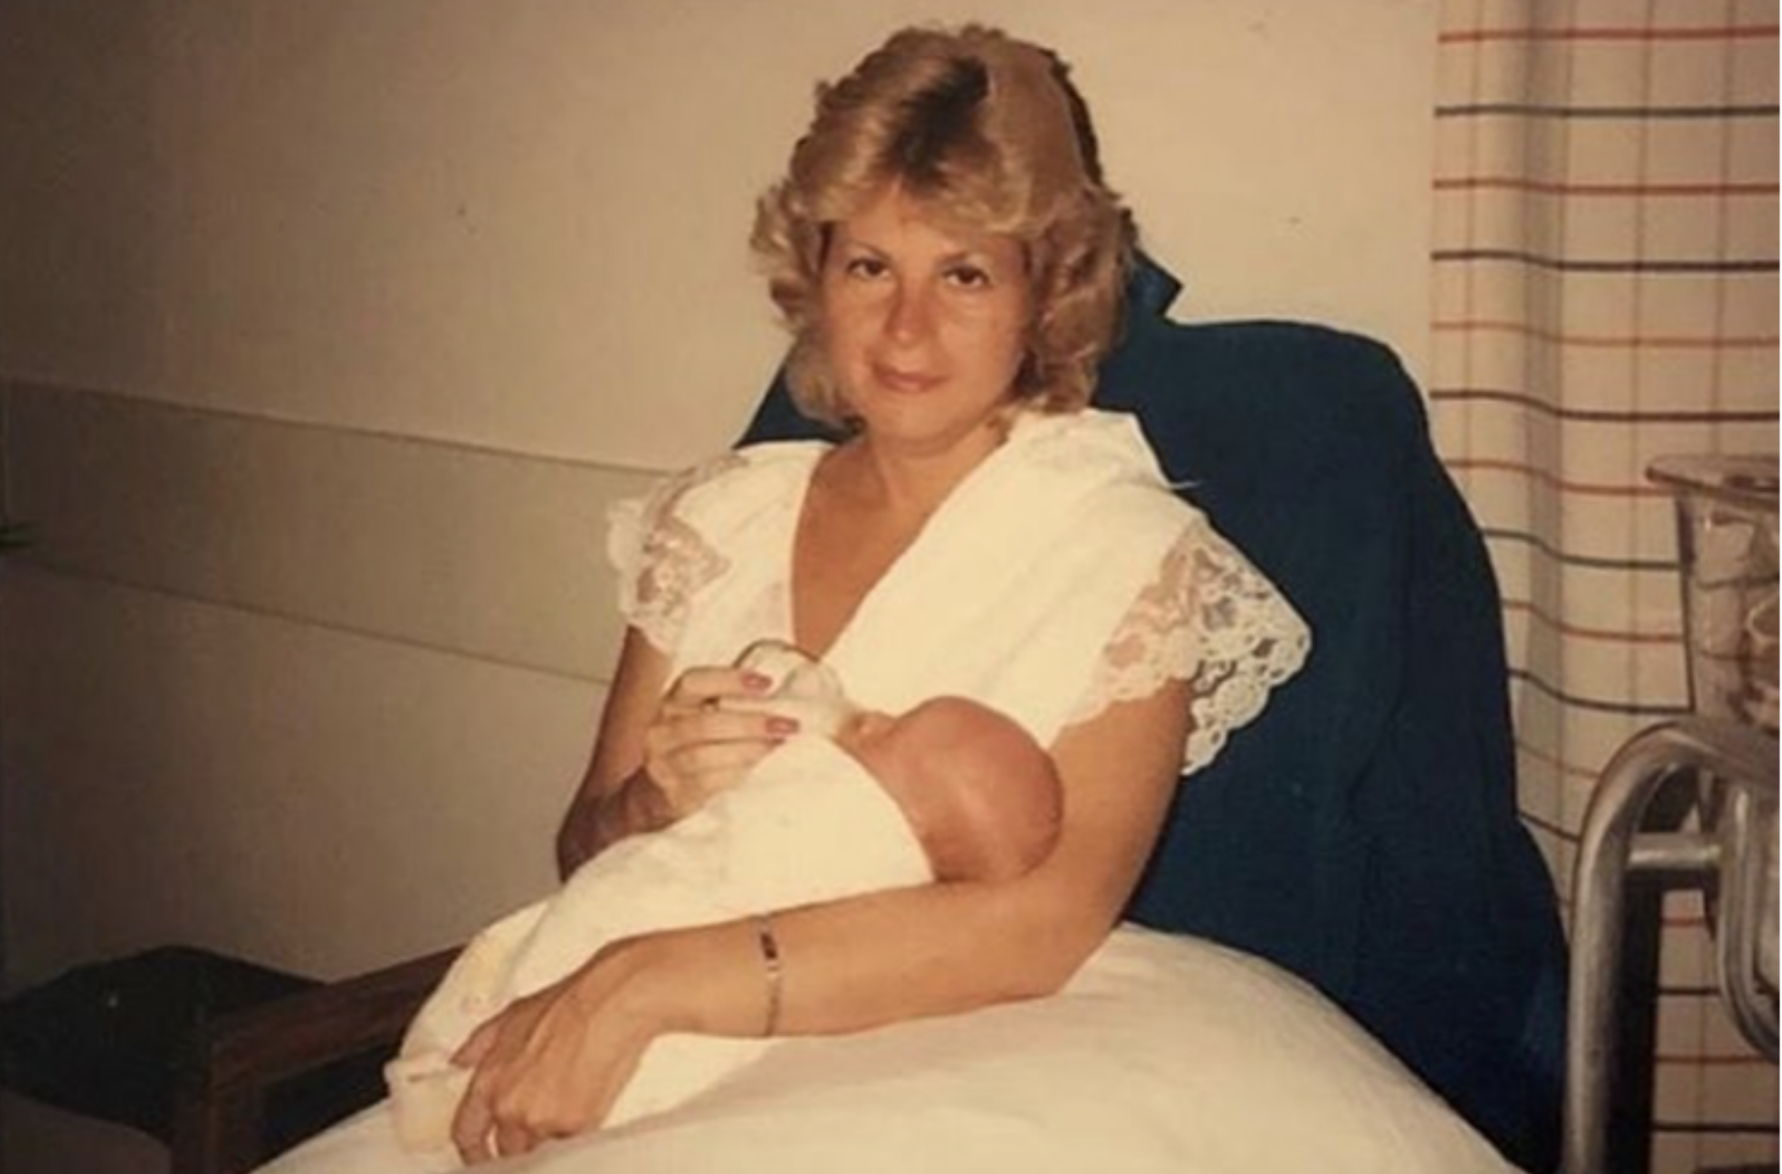 An old family photo of George's mother holding him as a baby.